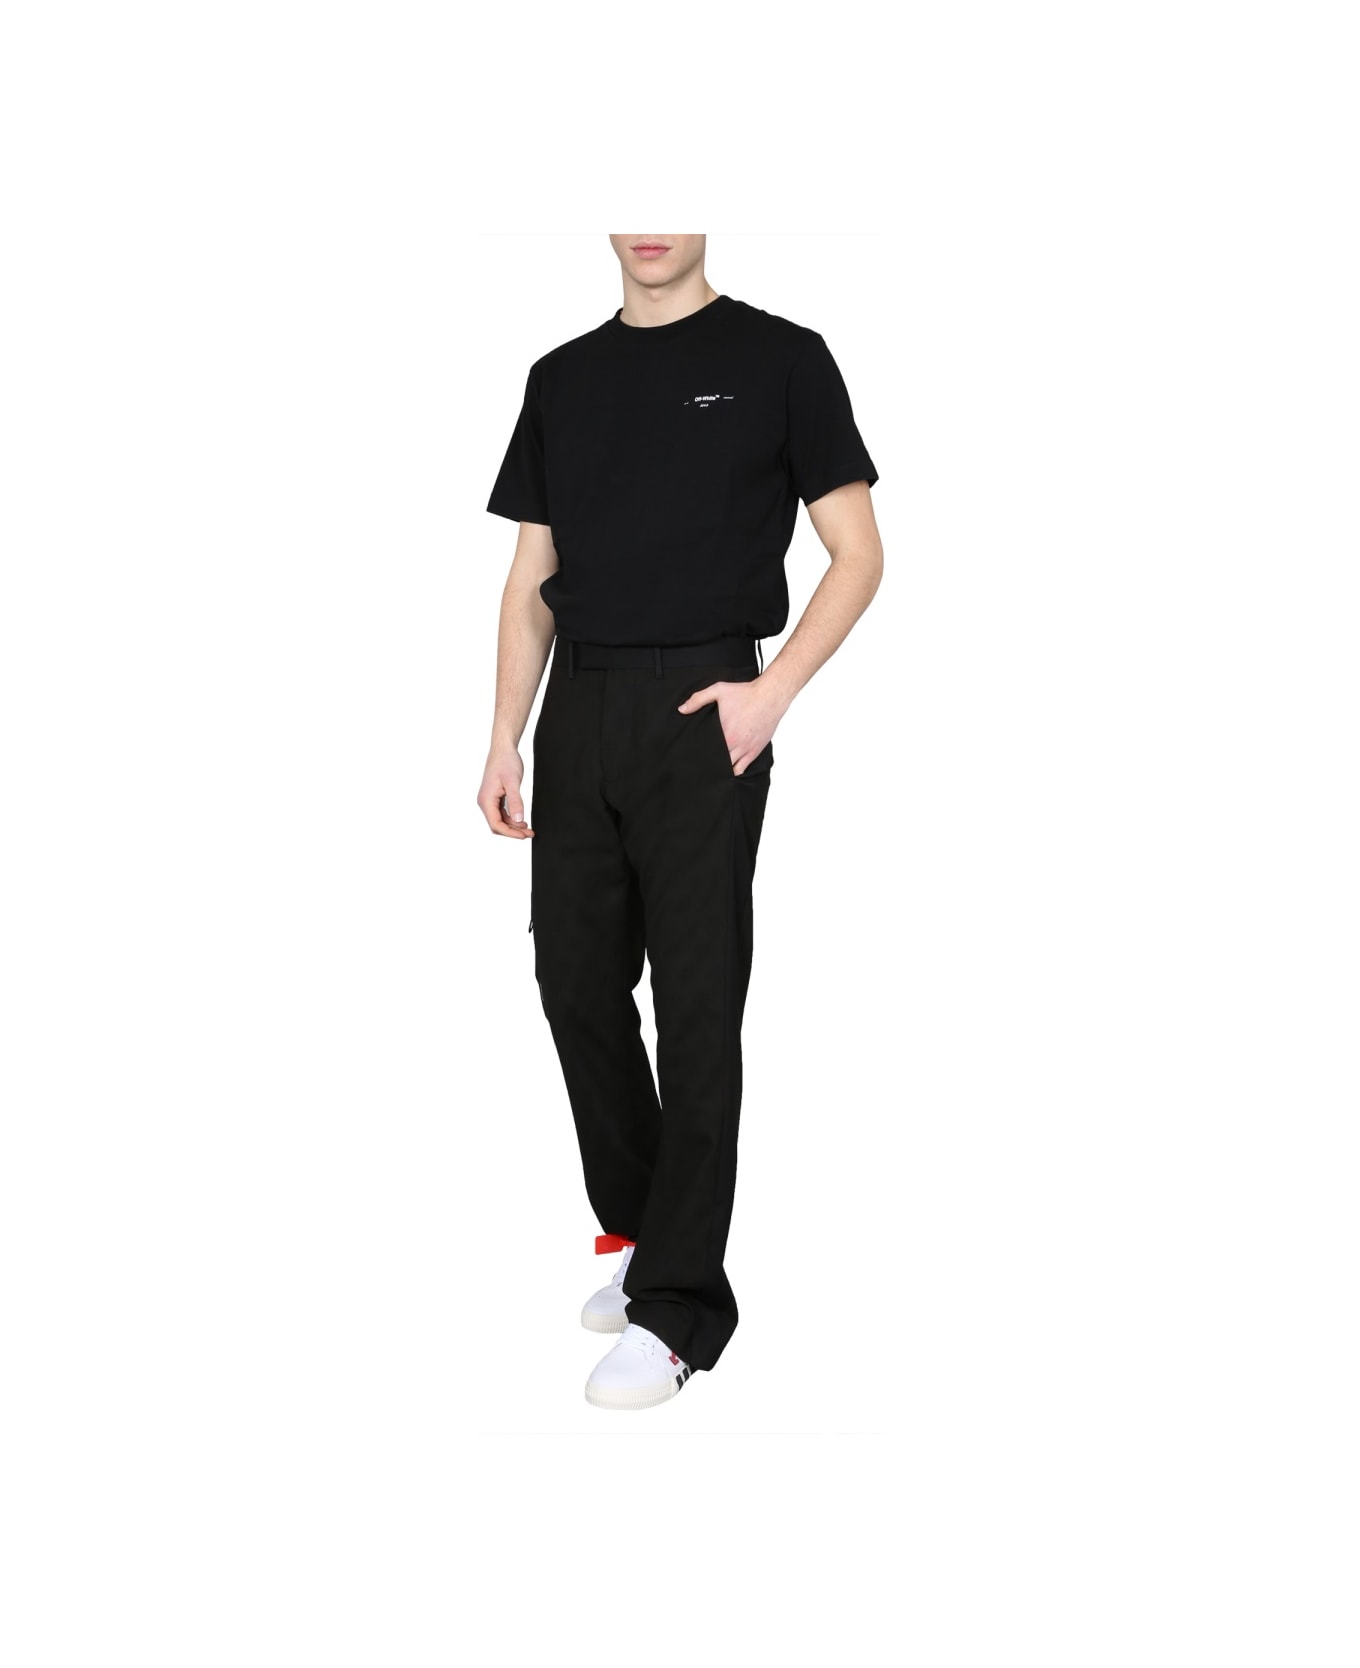 Off-White "low Fit" Trousers - BLACK